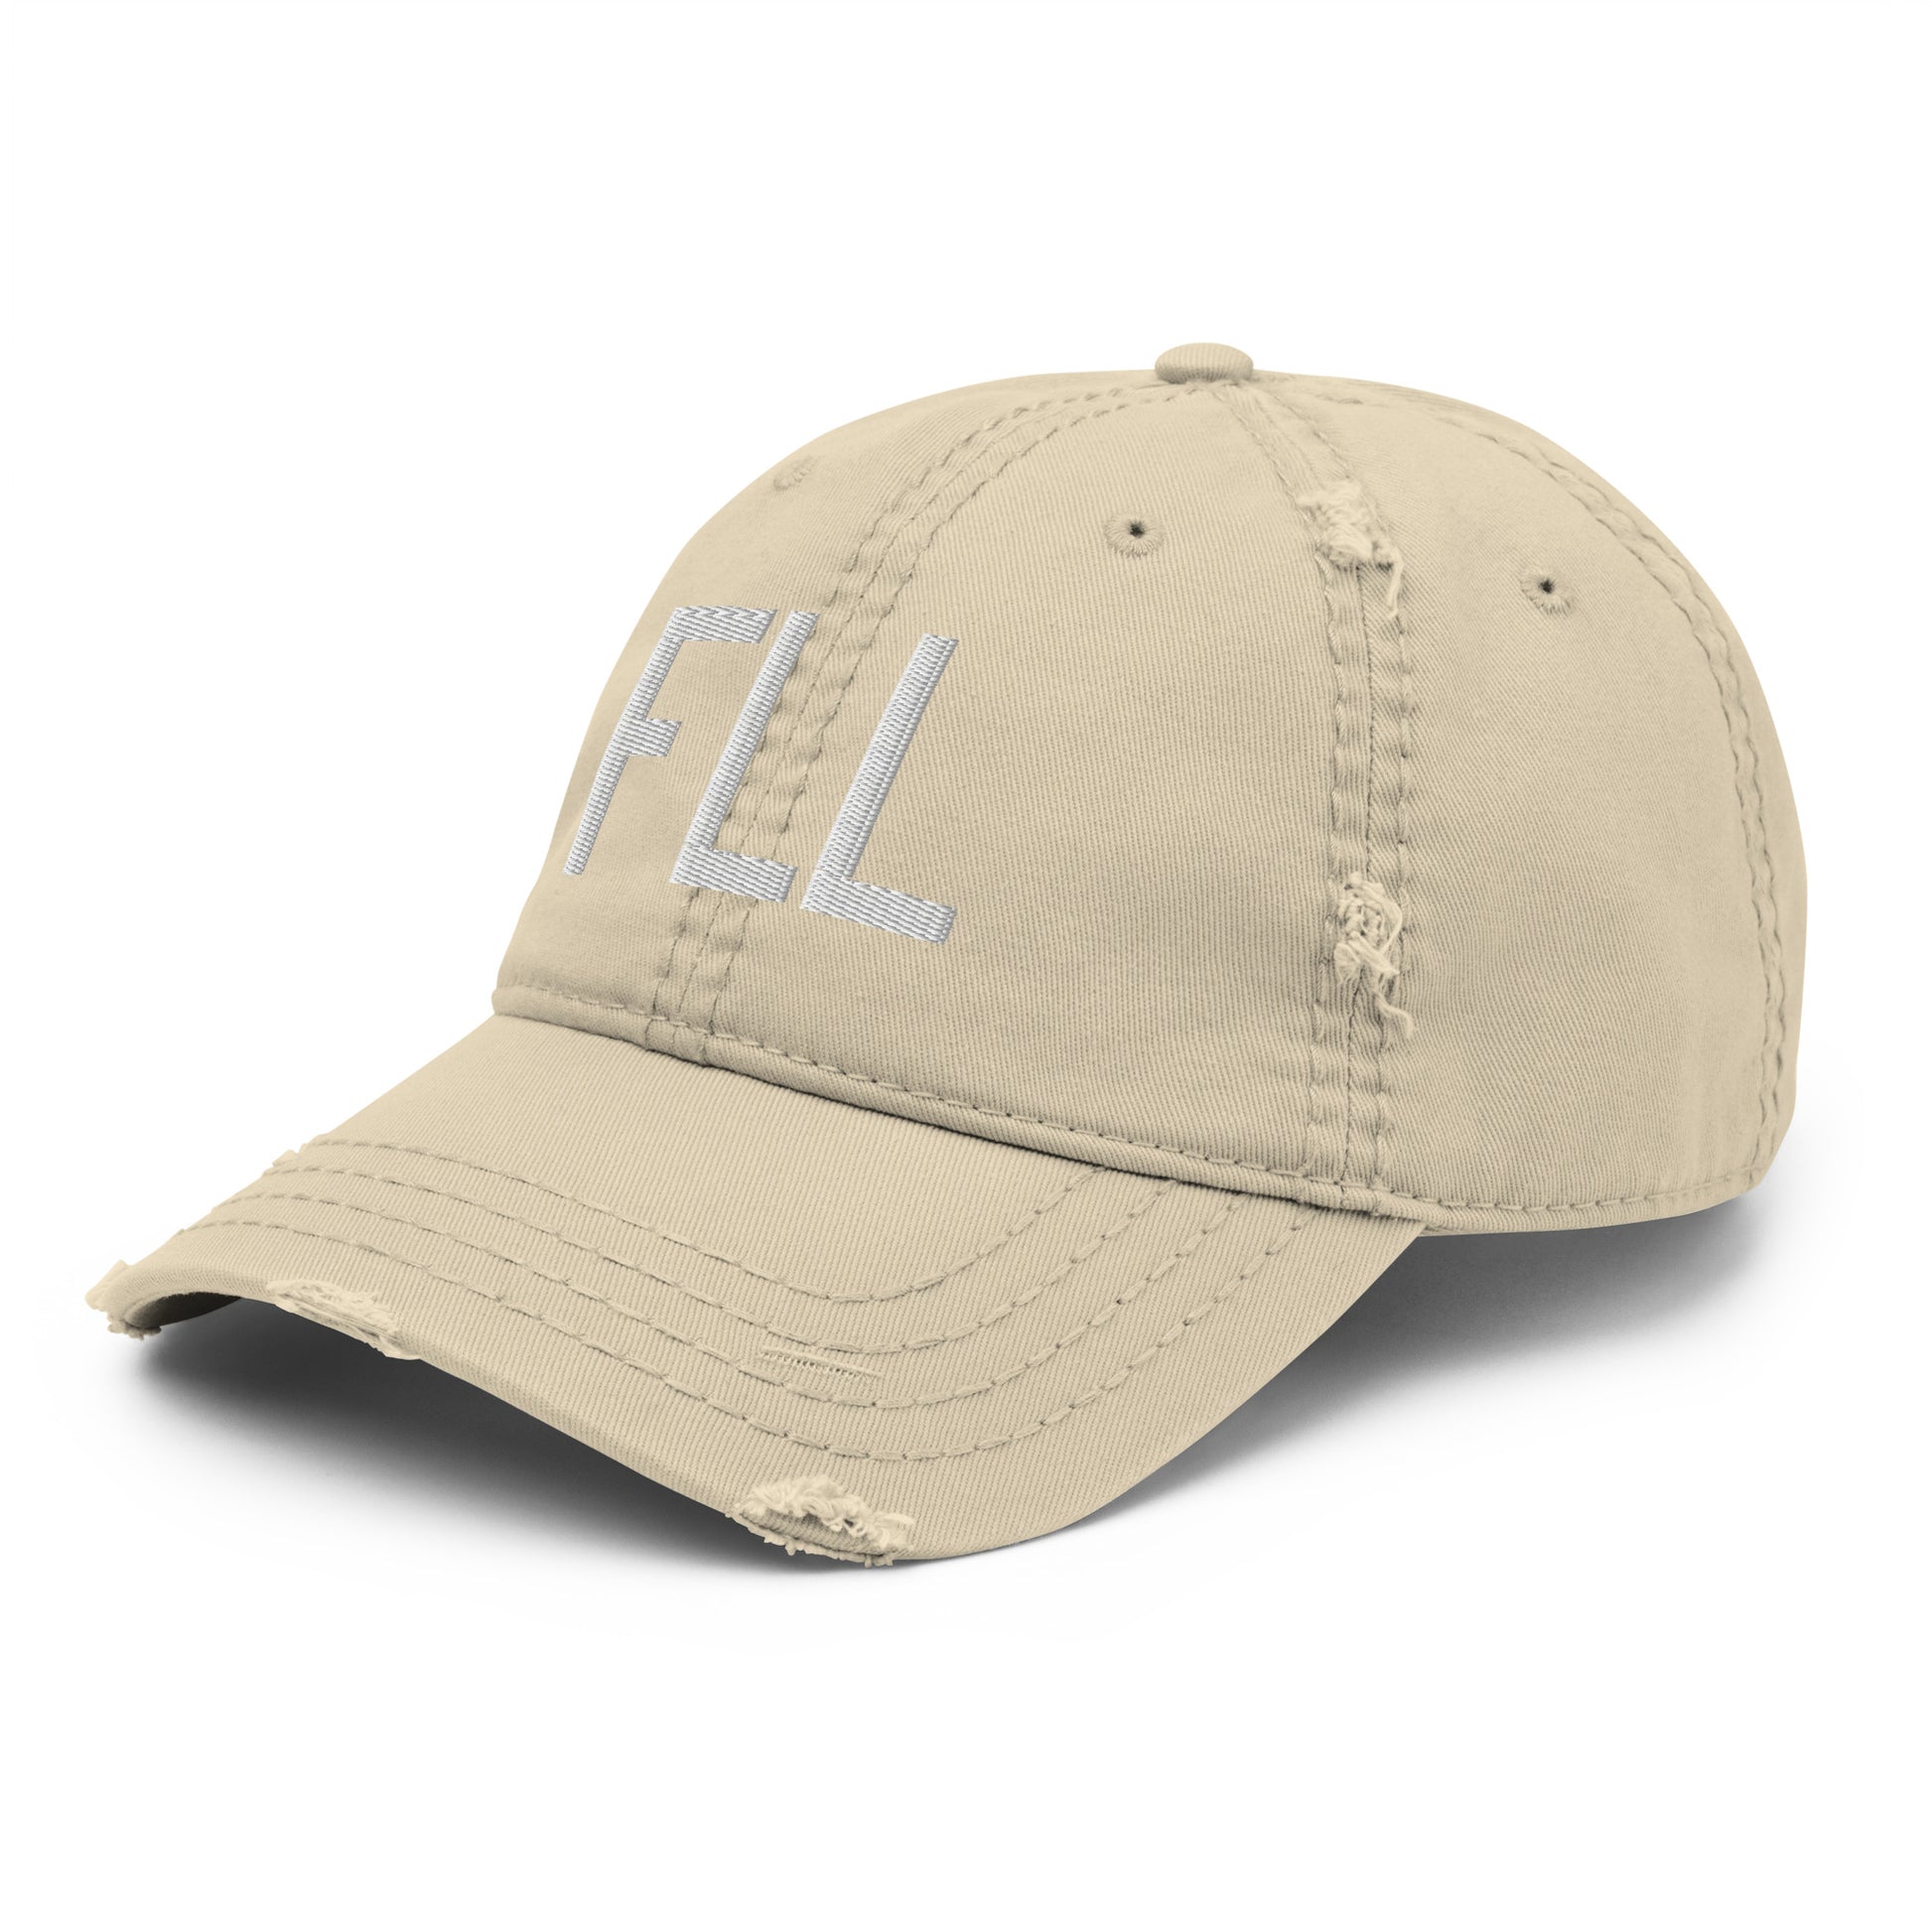 Airport Code Distressed Hat - White • FLL Fort Lauderdale • YHM Designs - Image 19